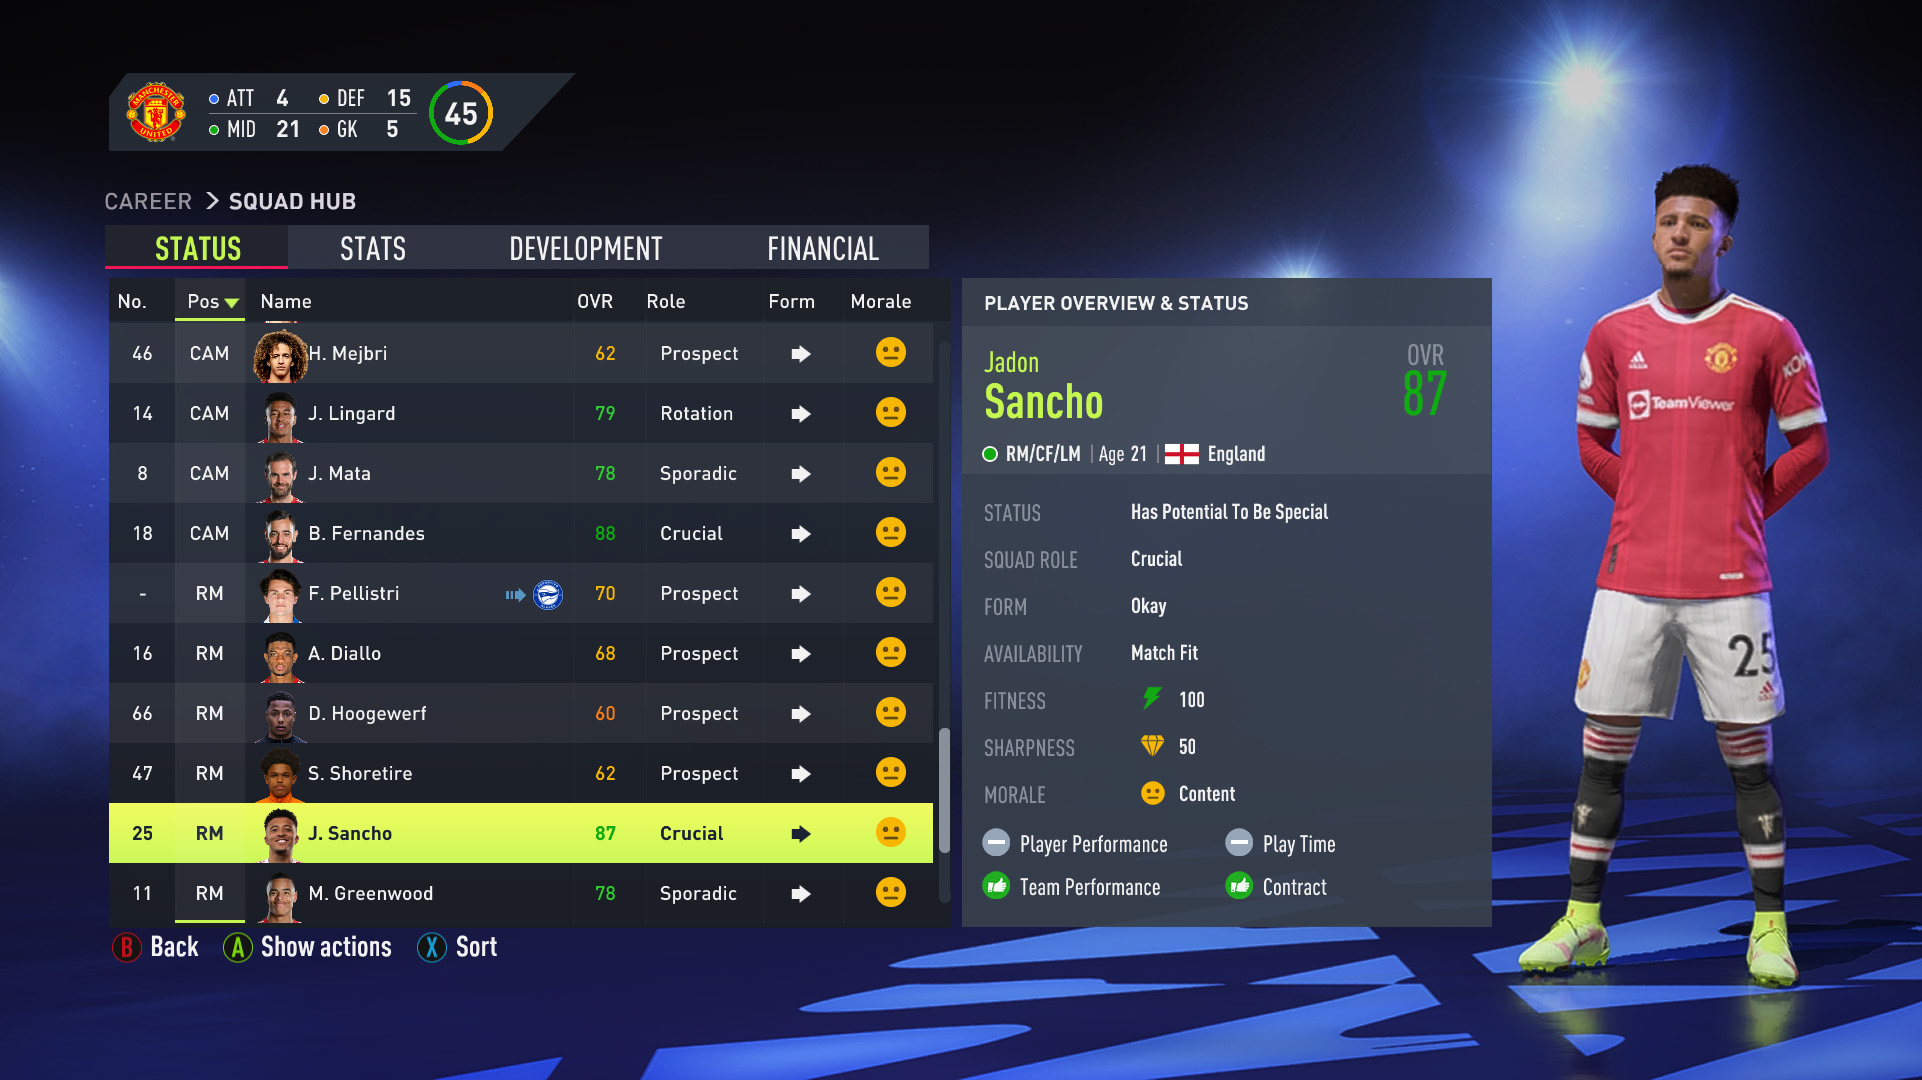 What is the max level in player Career Mode?